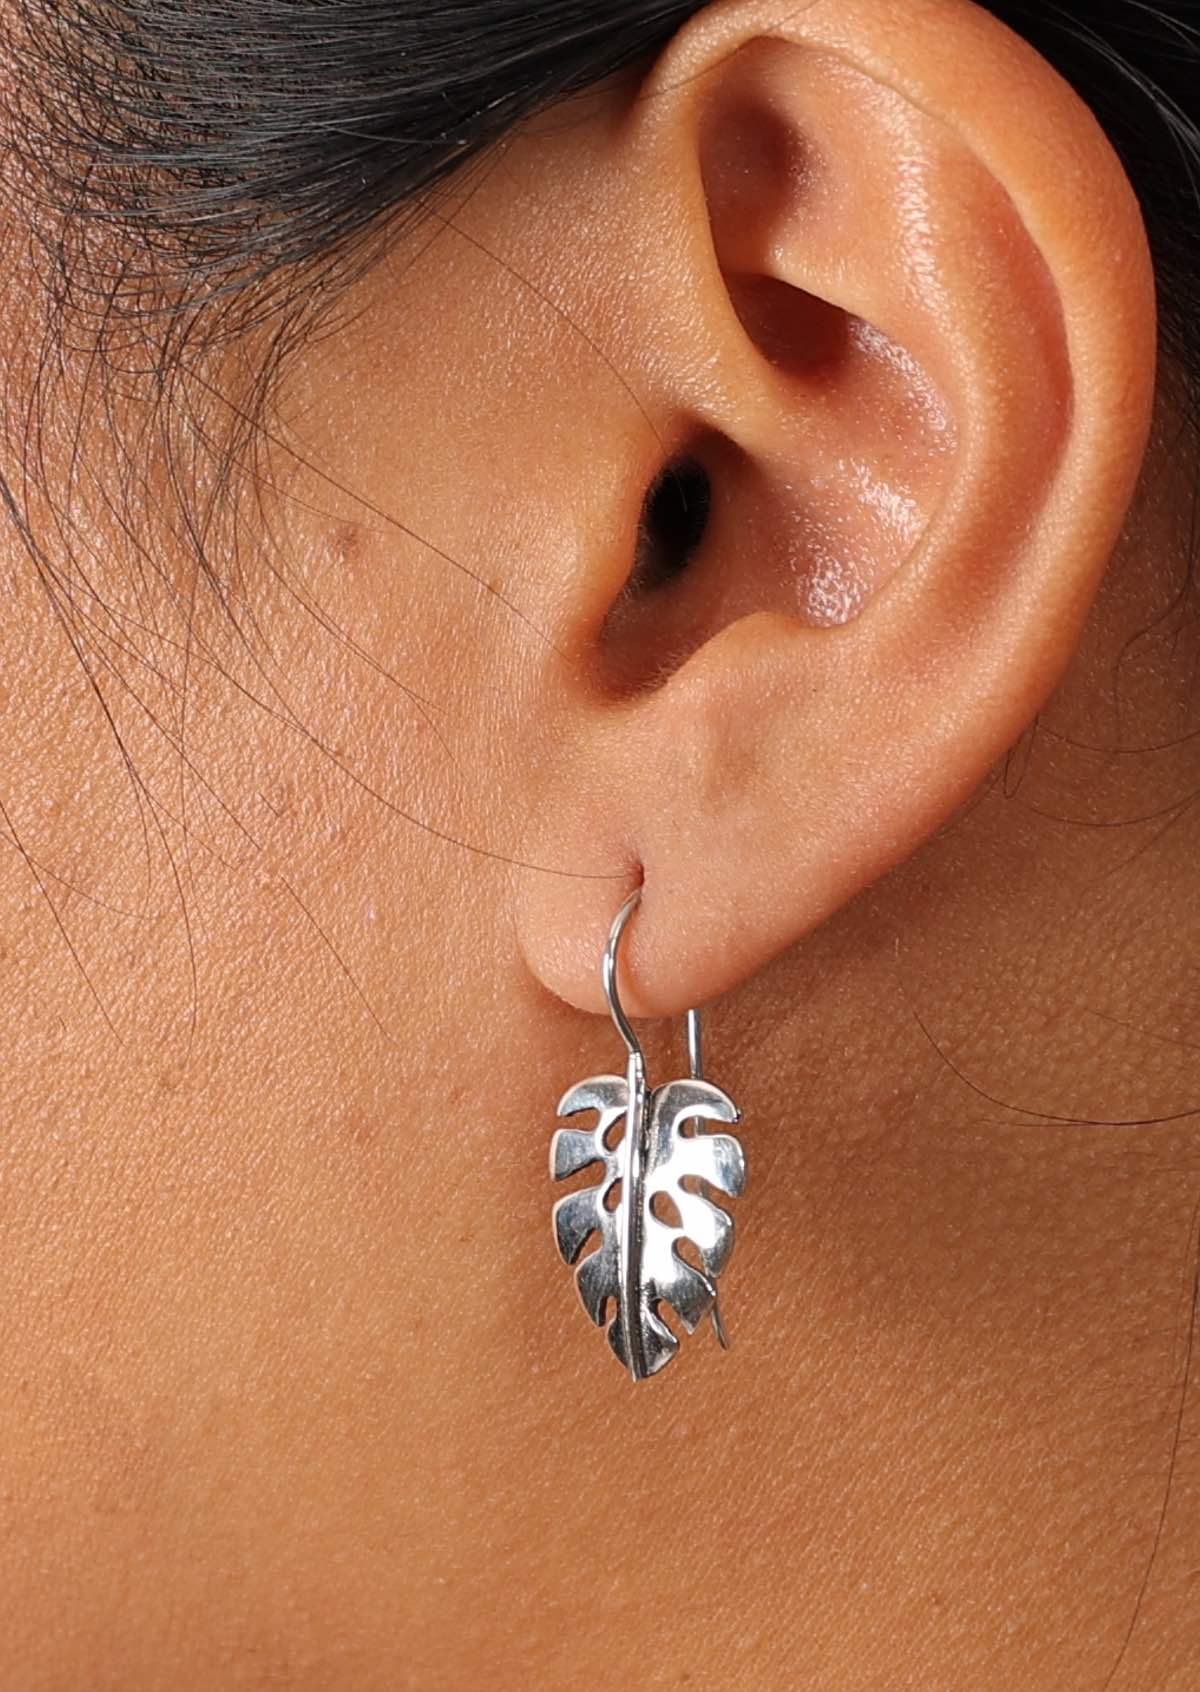 925 silver fixed hook earrings with stylish Monstera leaf design